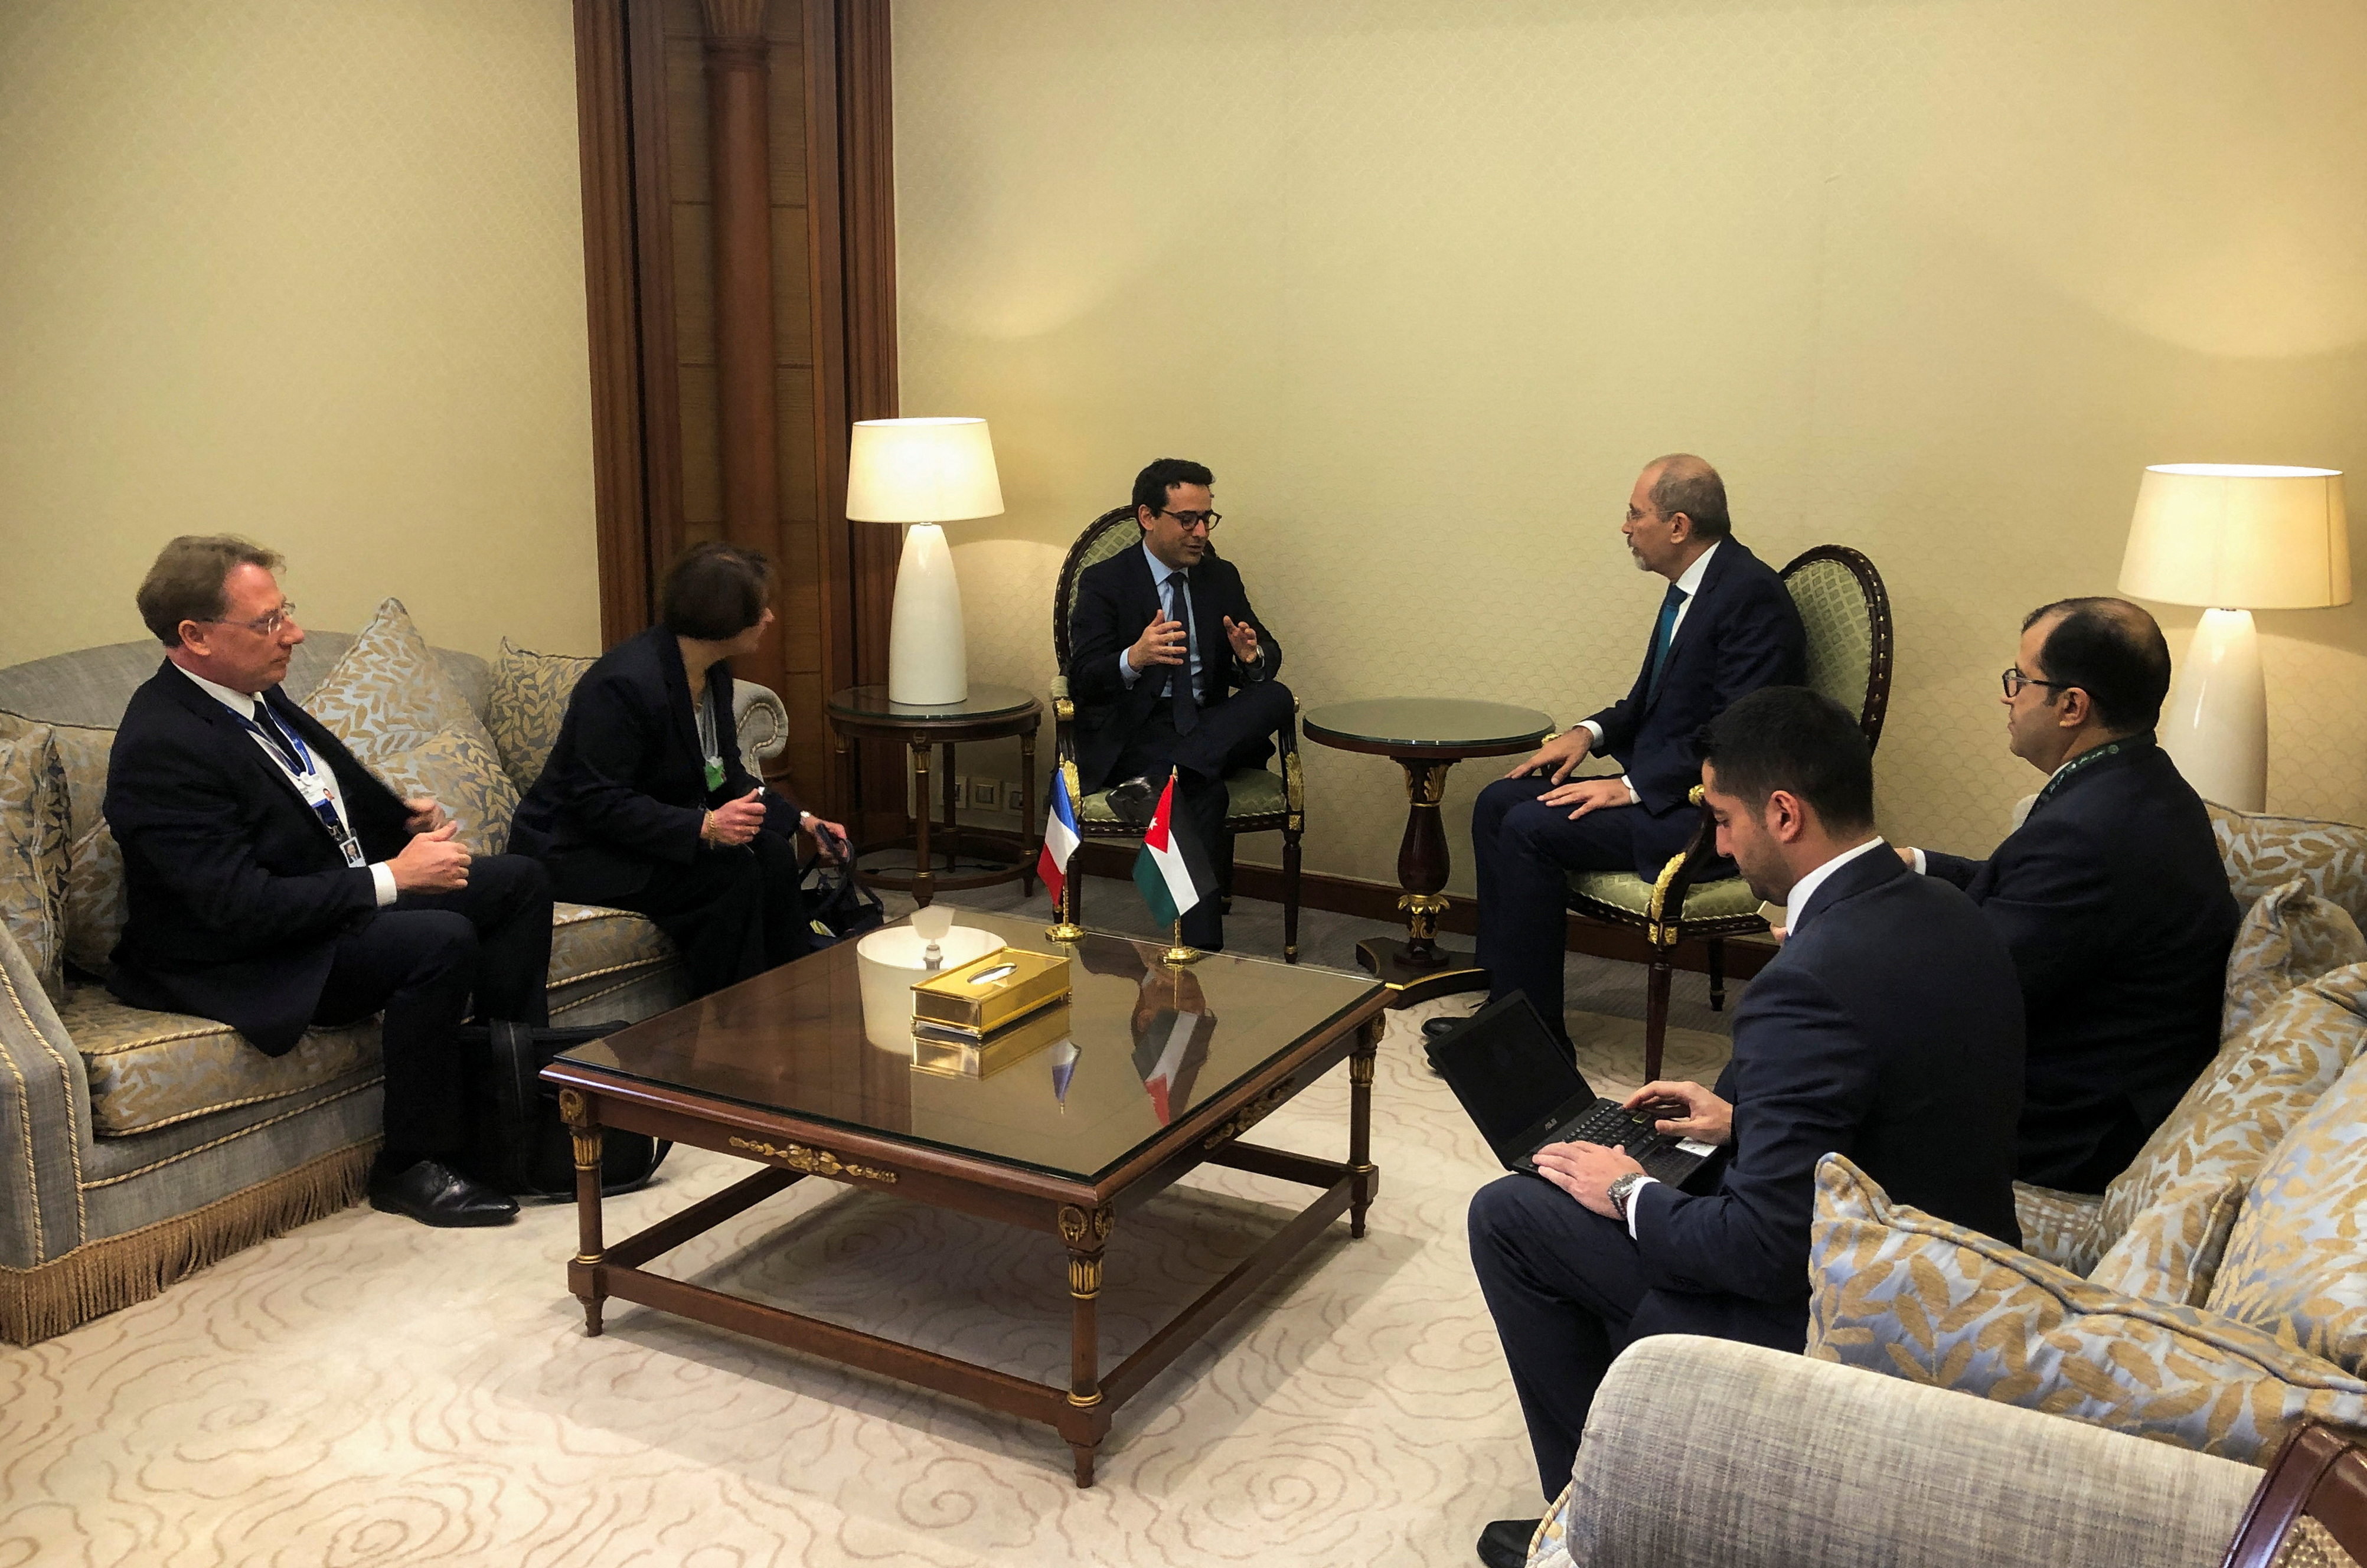 French Foreign Minister Stephane Sejourne meets with Jordan's Foreign Minister Ayman Safadi at the Ritz-Carlton hotel in Riyadh